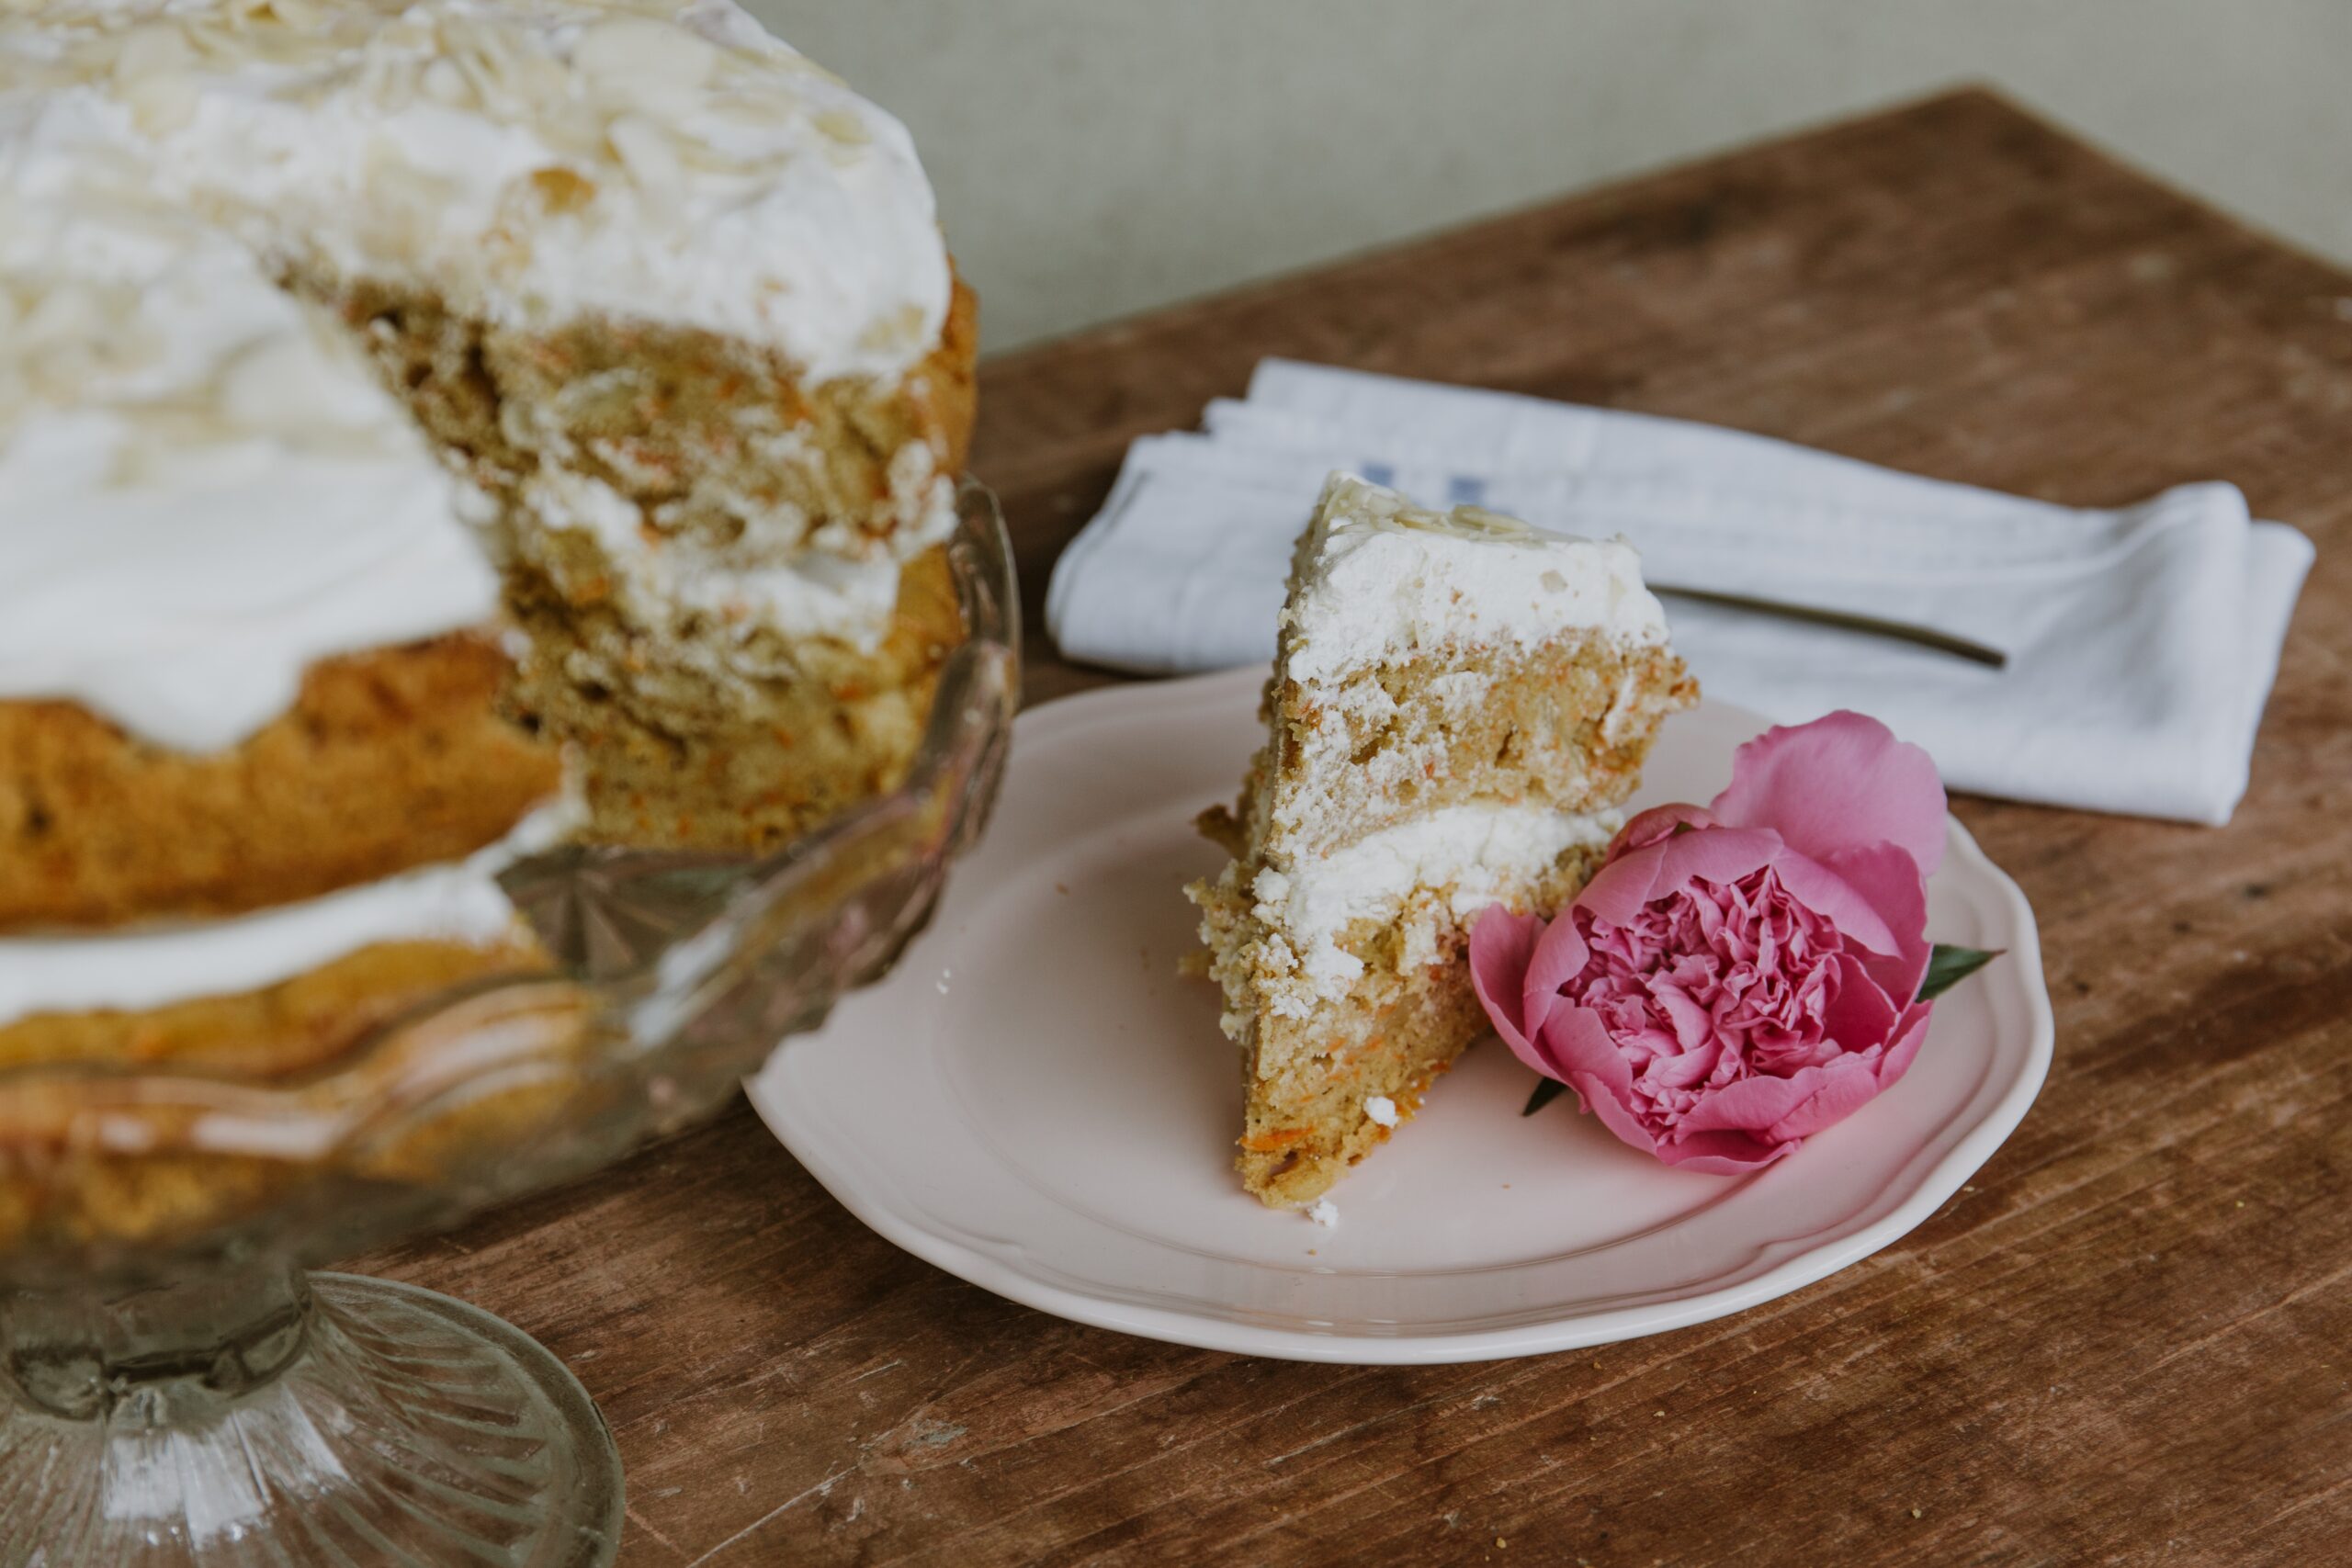 Light Carrot Cake, suitable for diets: a delicious Sugar-Free Carrot Cake.